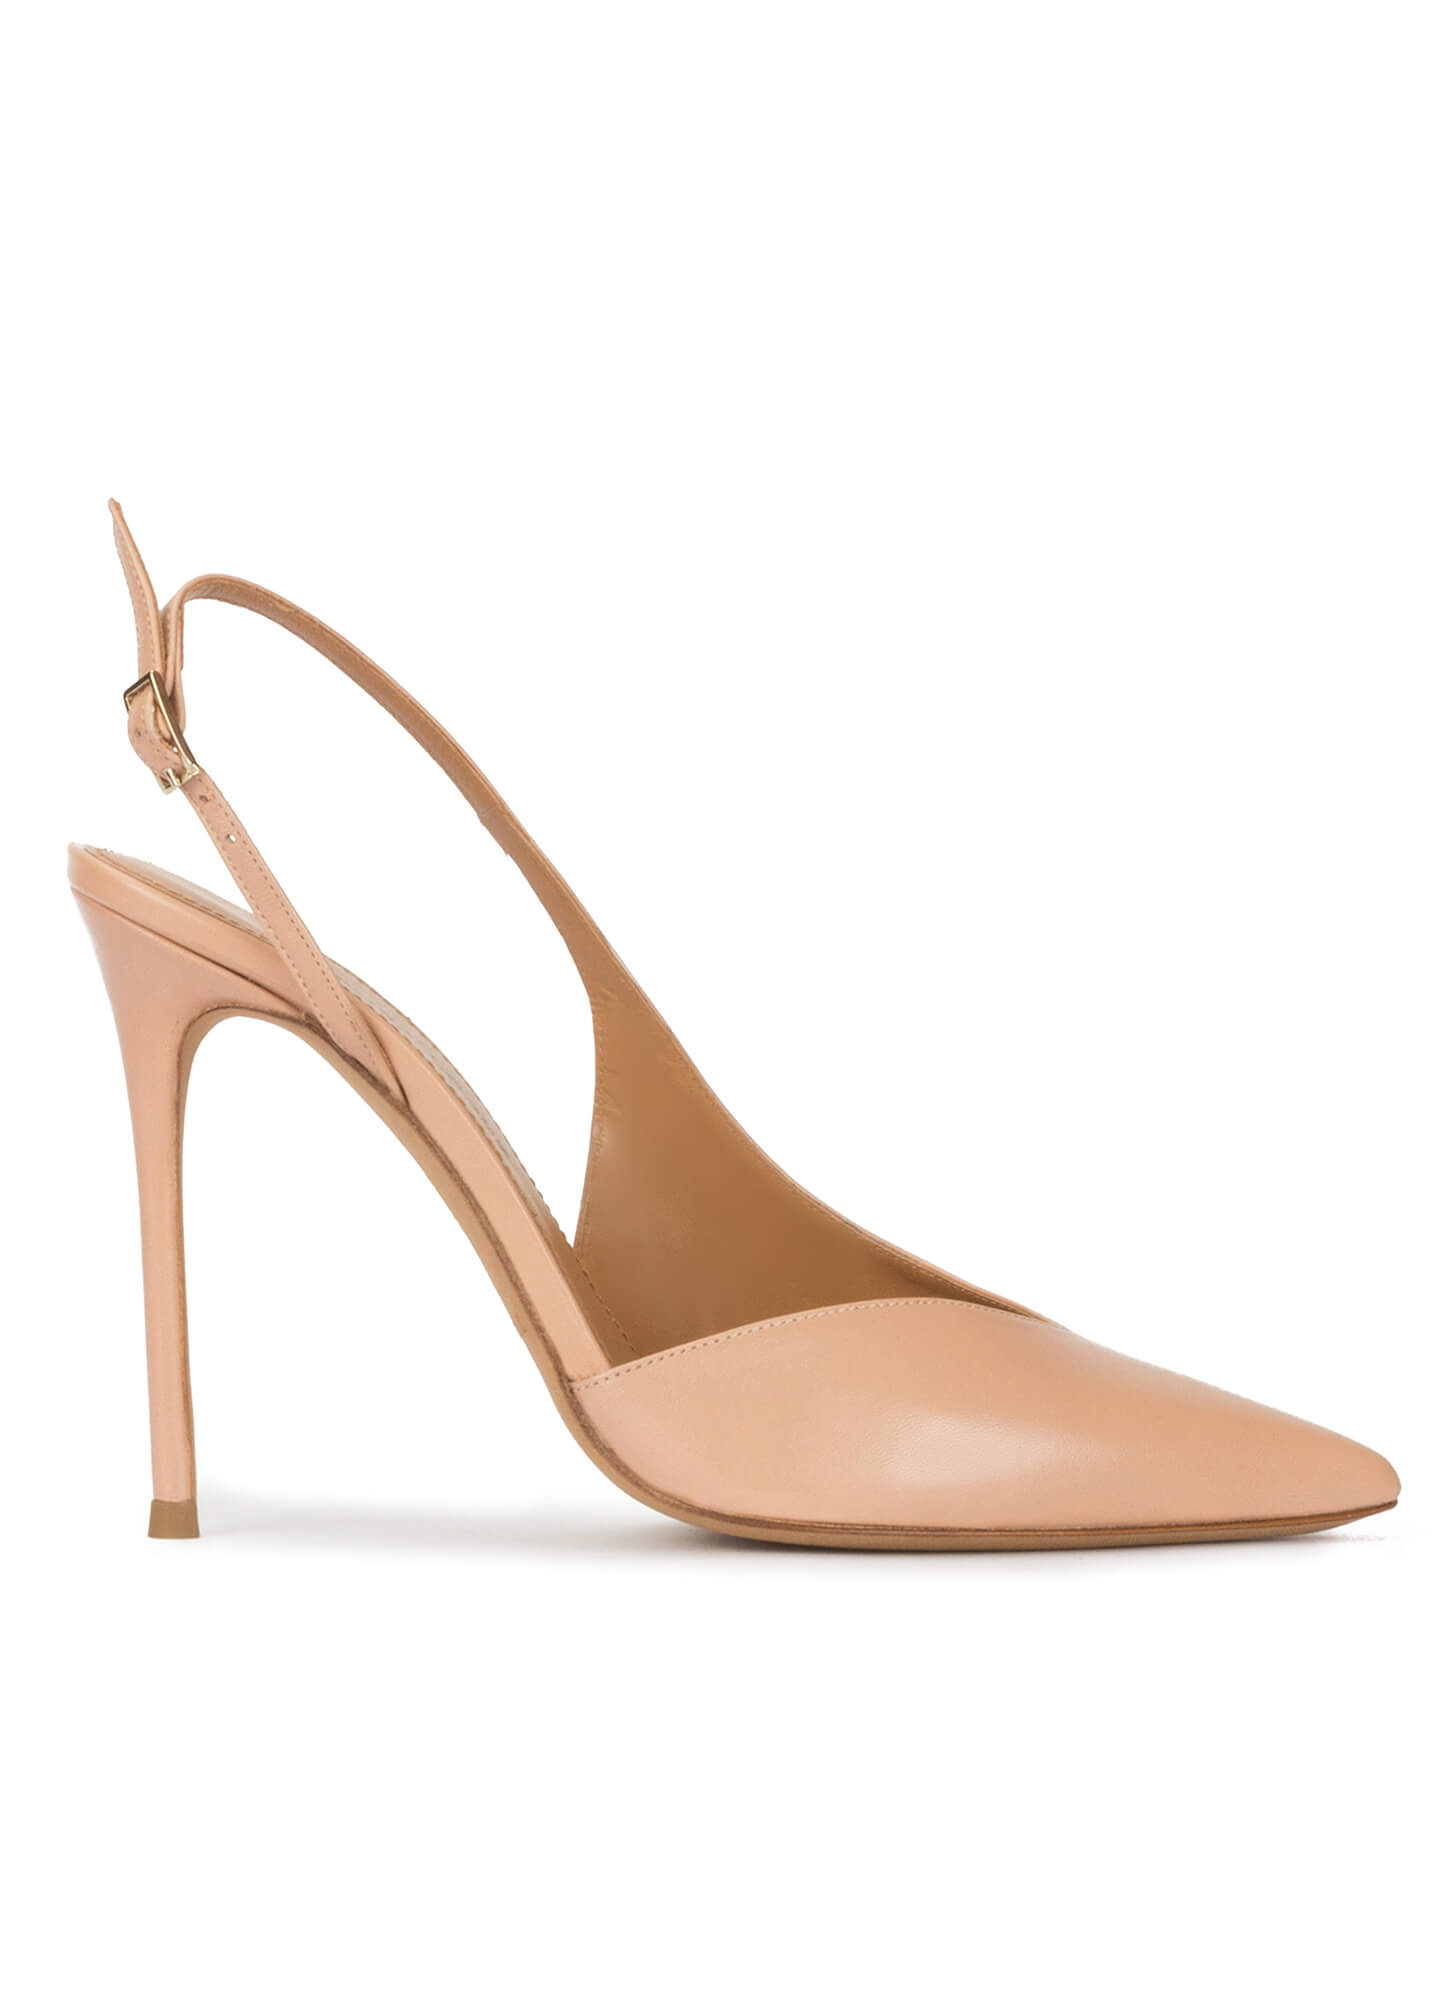 sling back nude shoes